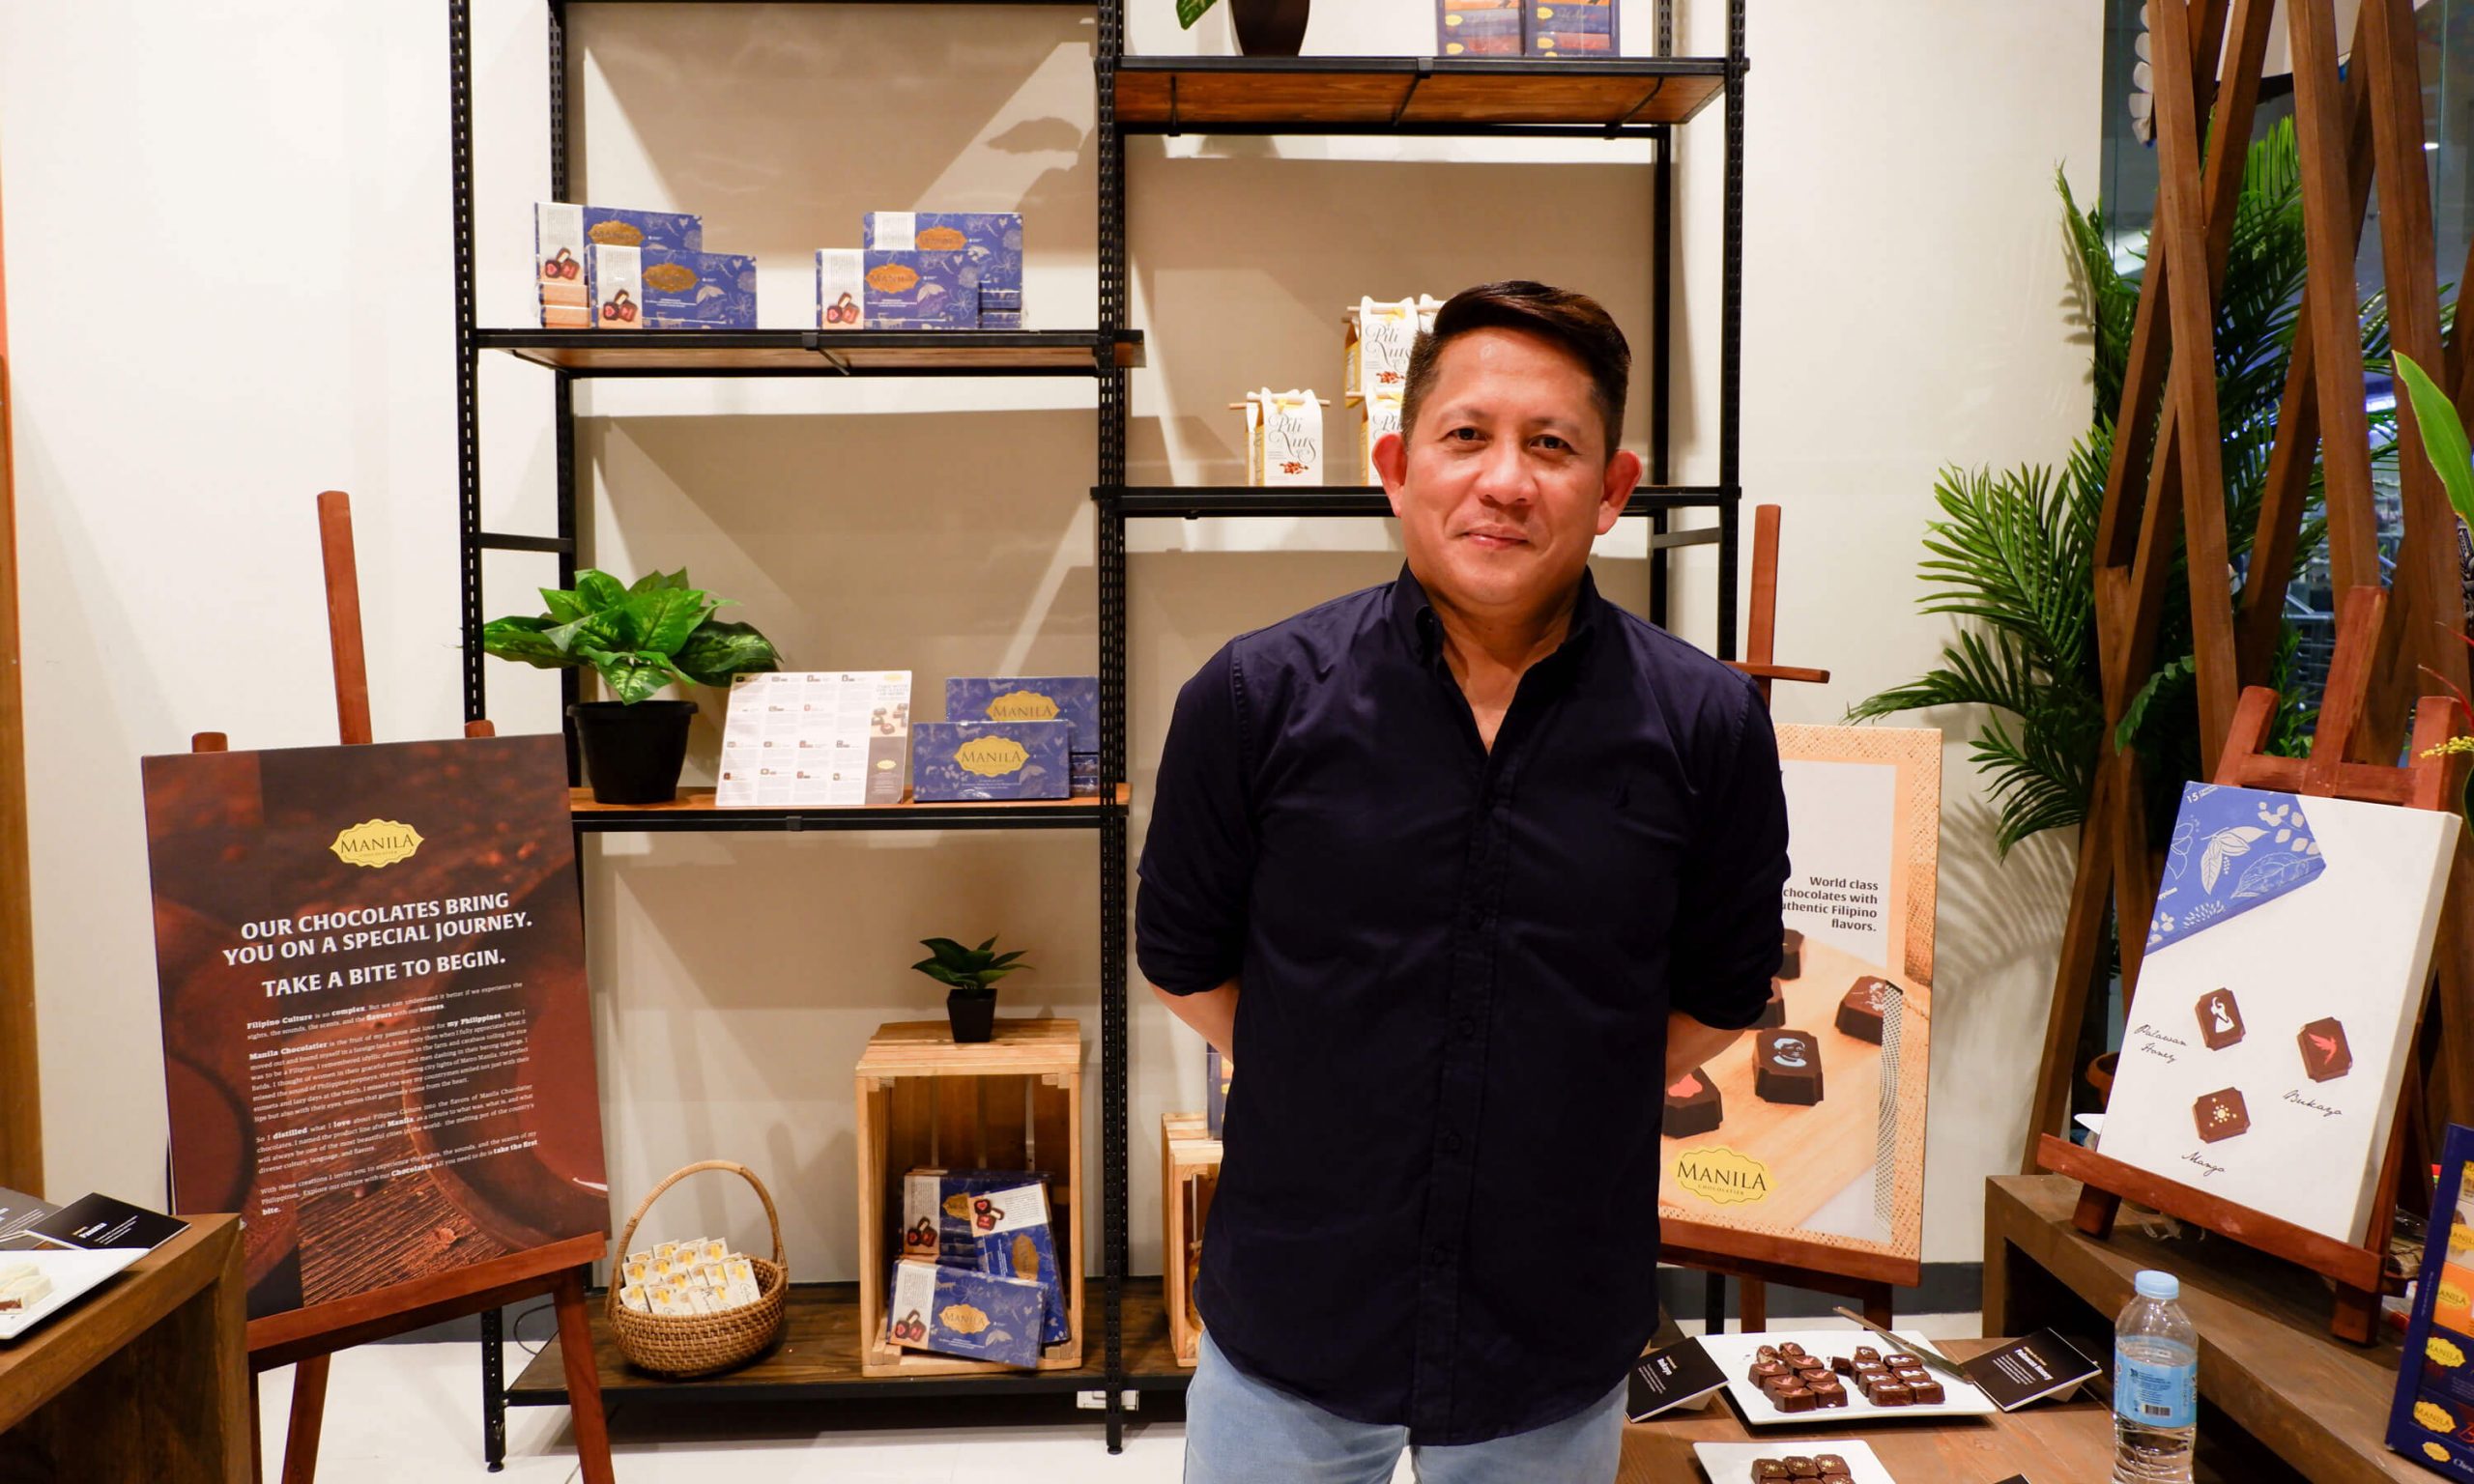 RAUL MATIAS, owner and founder of Manila Chocolatier, said that his chocolates promote Philippine culture by highlighting distinct local flavors.